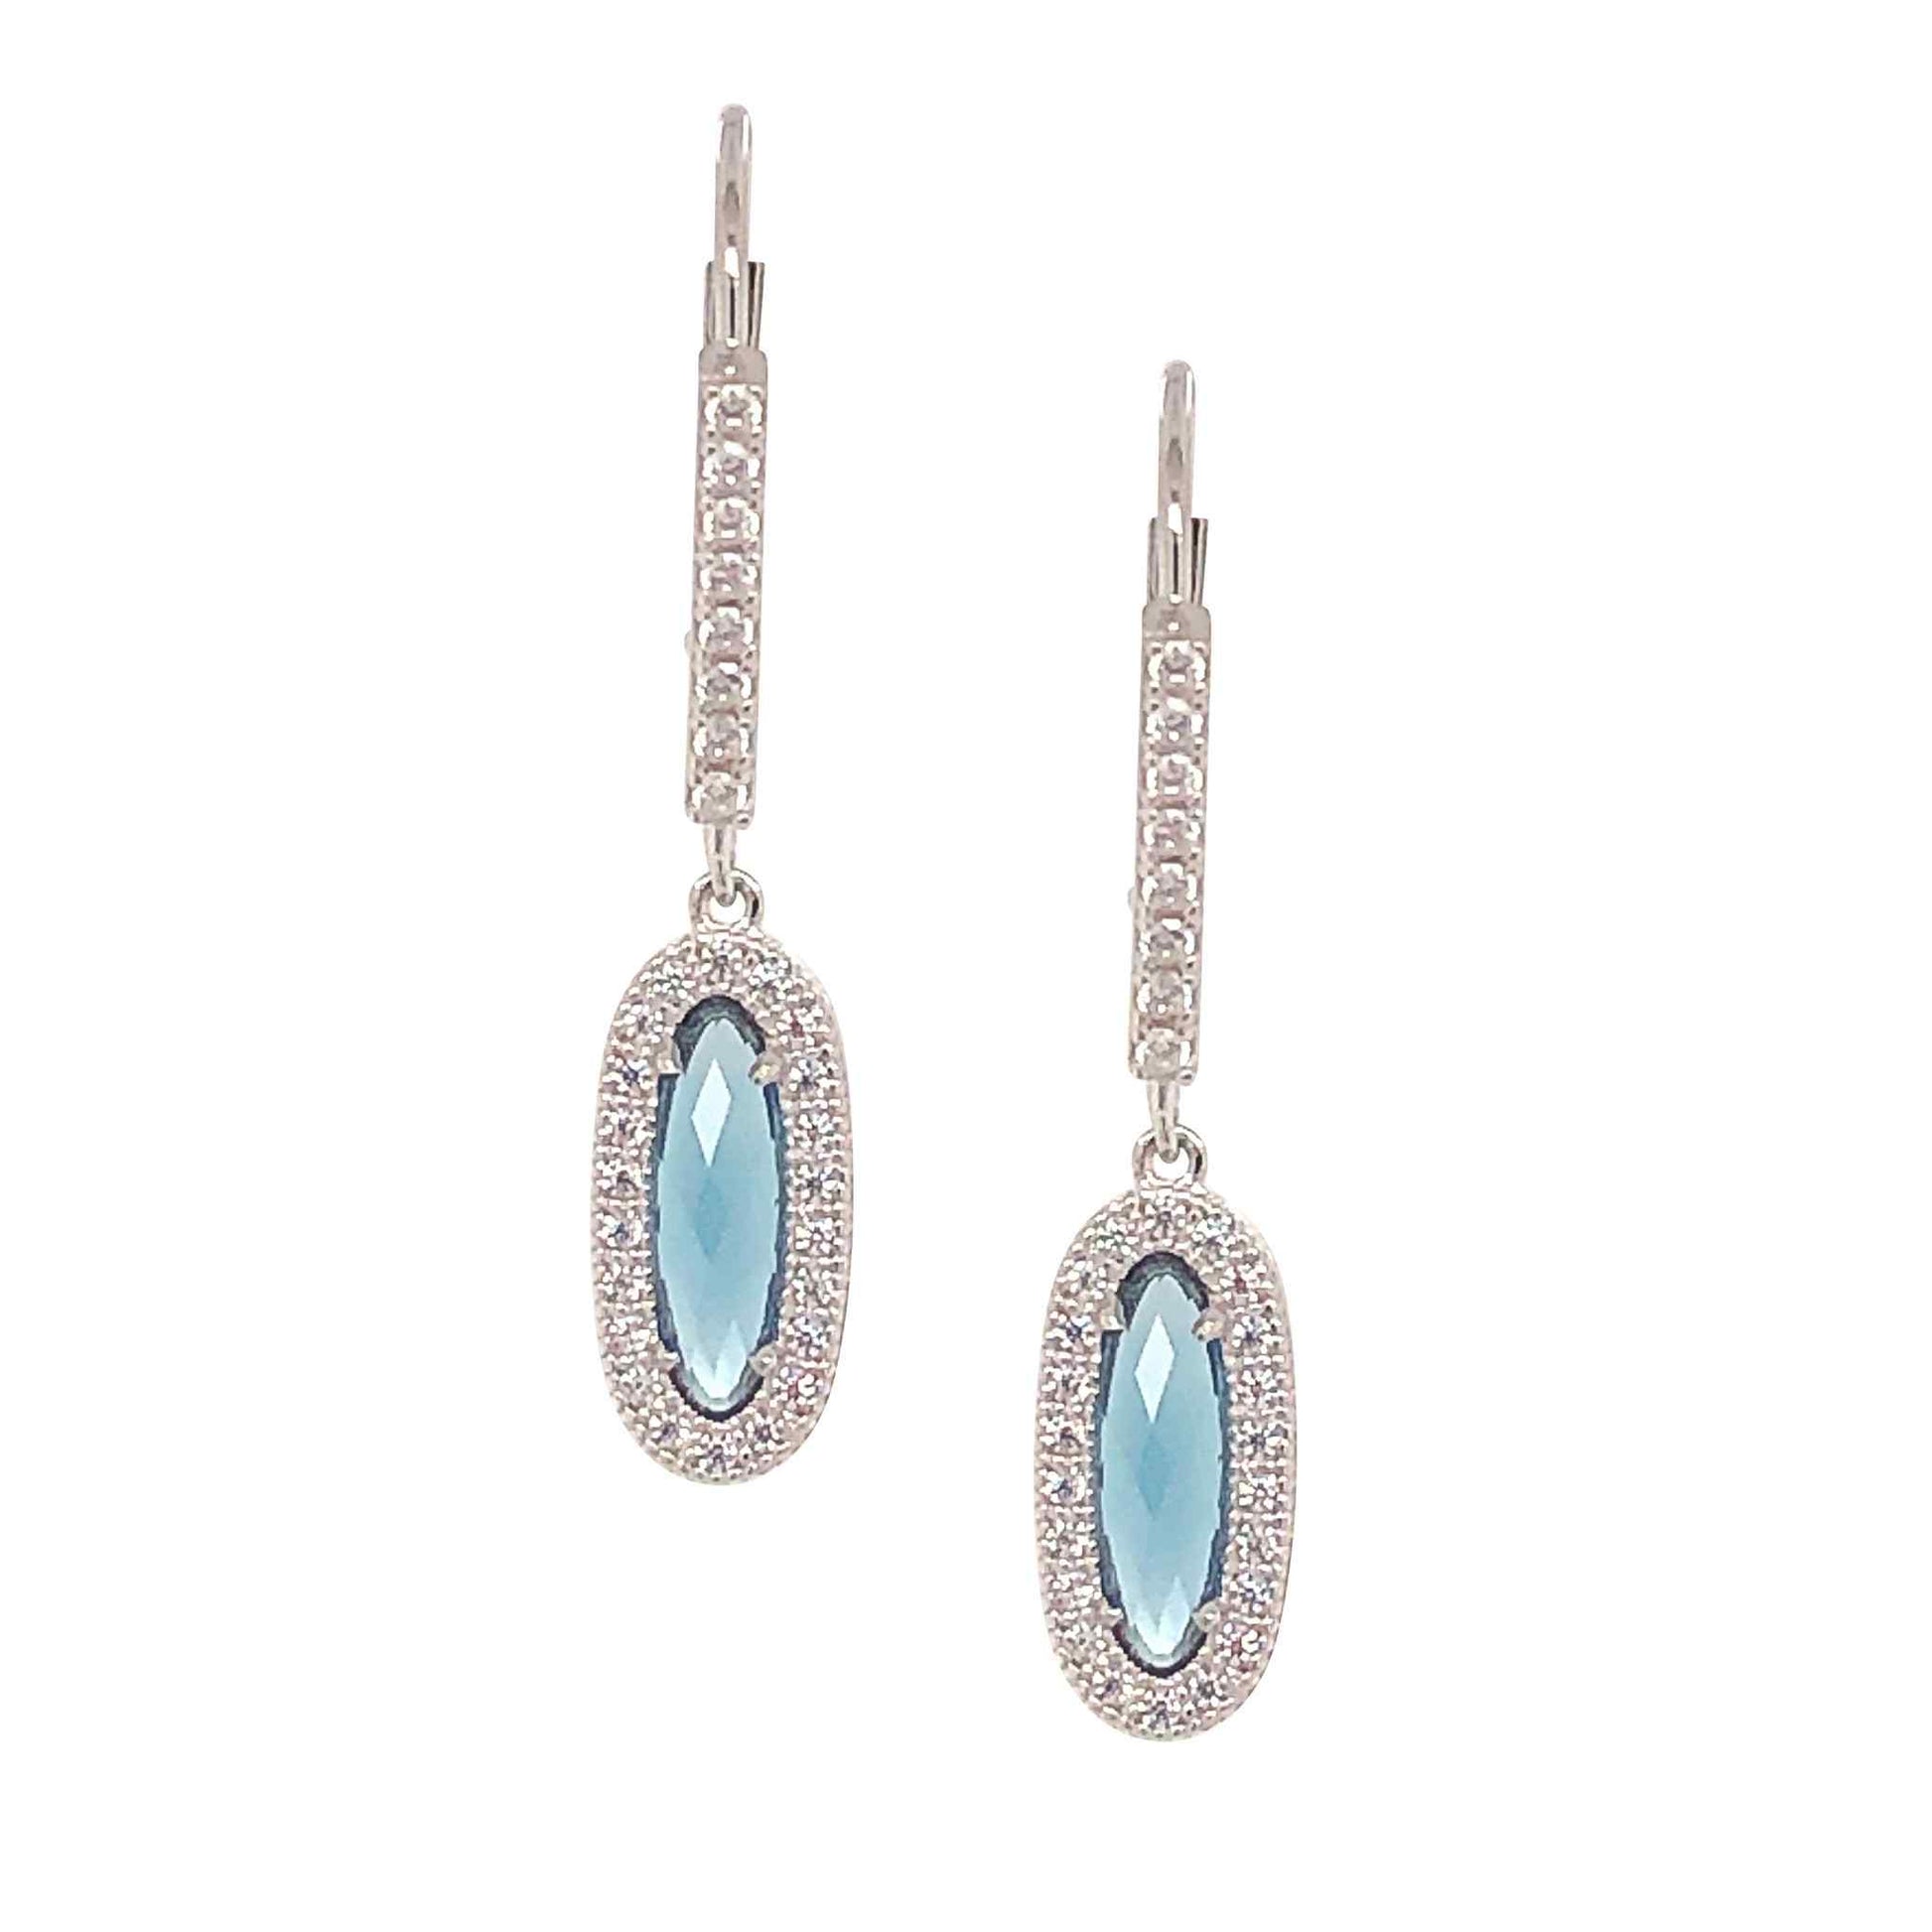 A simulated blue topaz & diamonds oblong earrings displayed on a neutral white background.